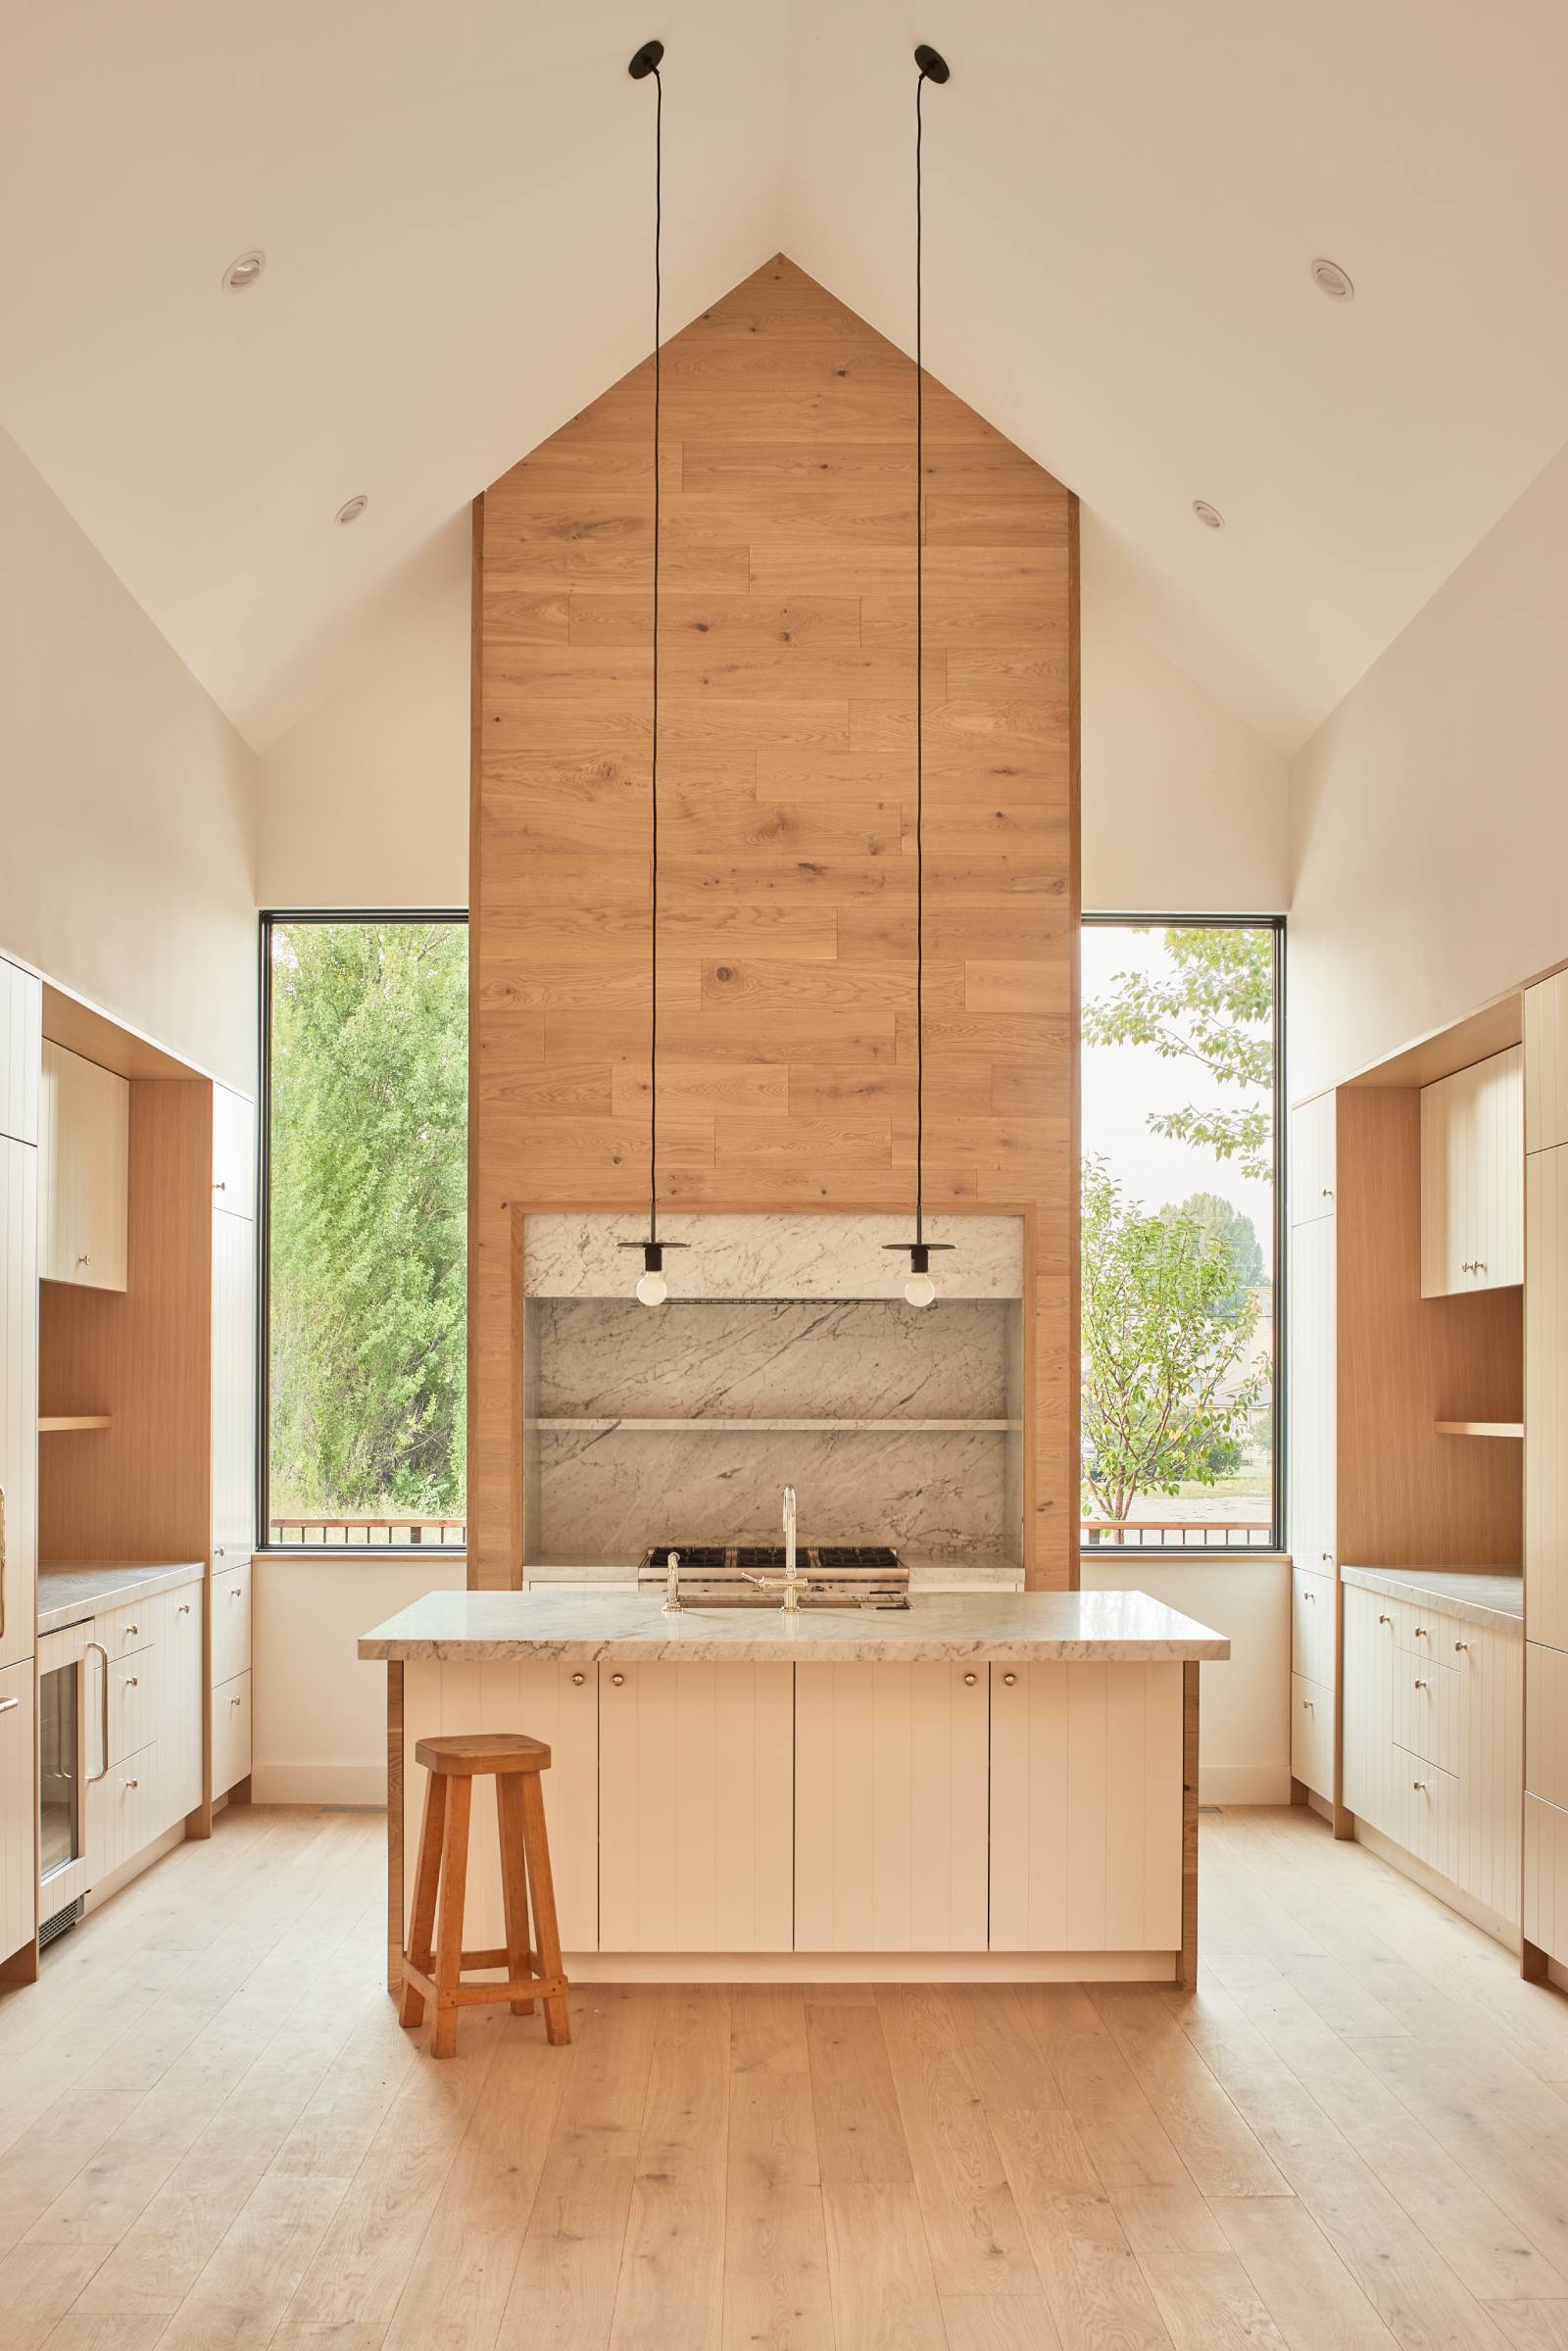 Interior view of the kitchen at Double Hansen, a custom duplex designed and built by Farmer Payne Architects.